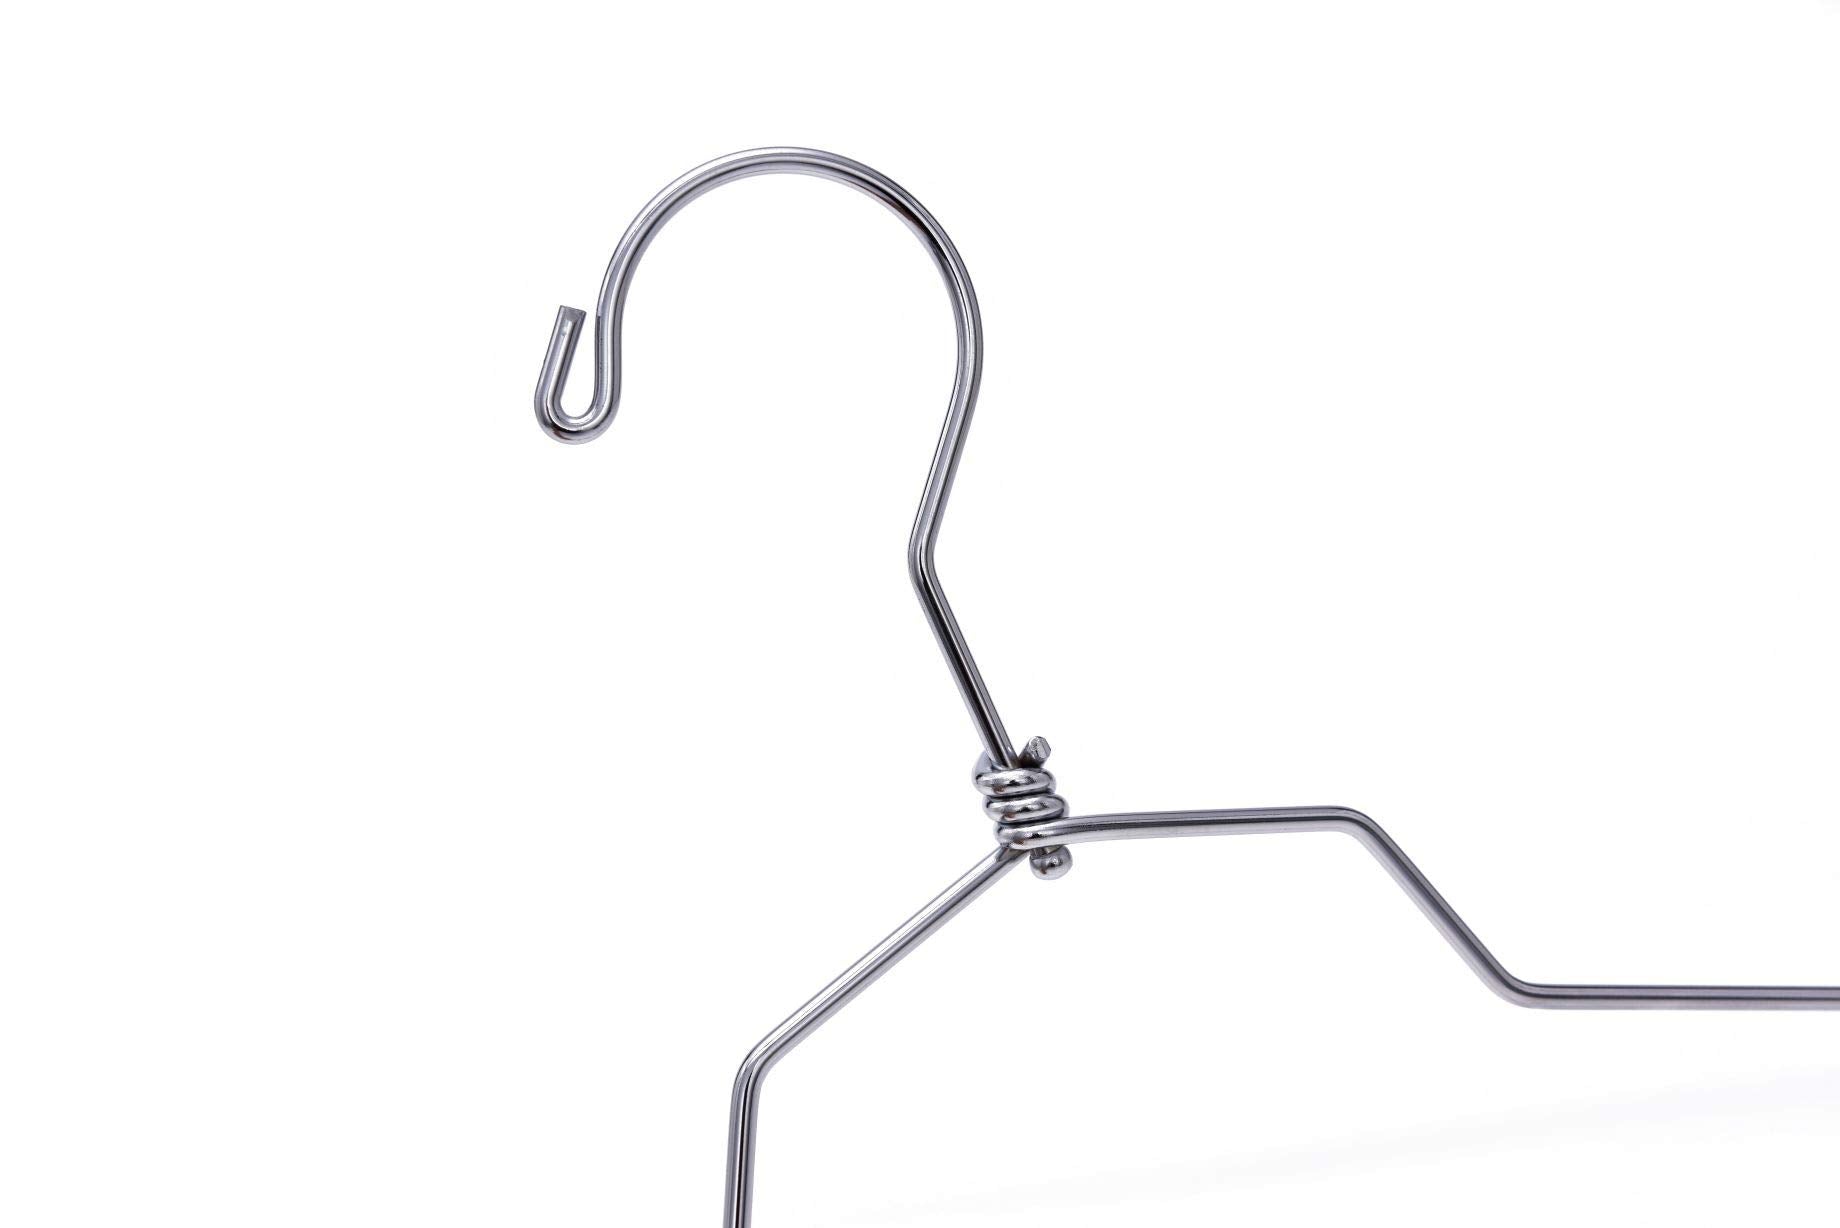 10 Quality Metal Hangers, Swivel Hook, Stainless Steel Heavy Duty Wire Clothes Hangers